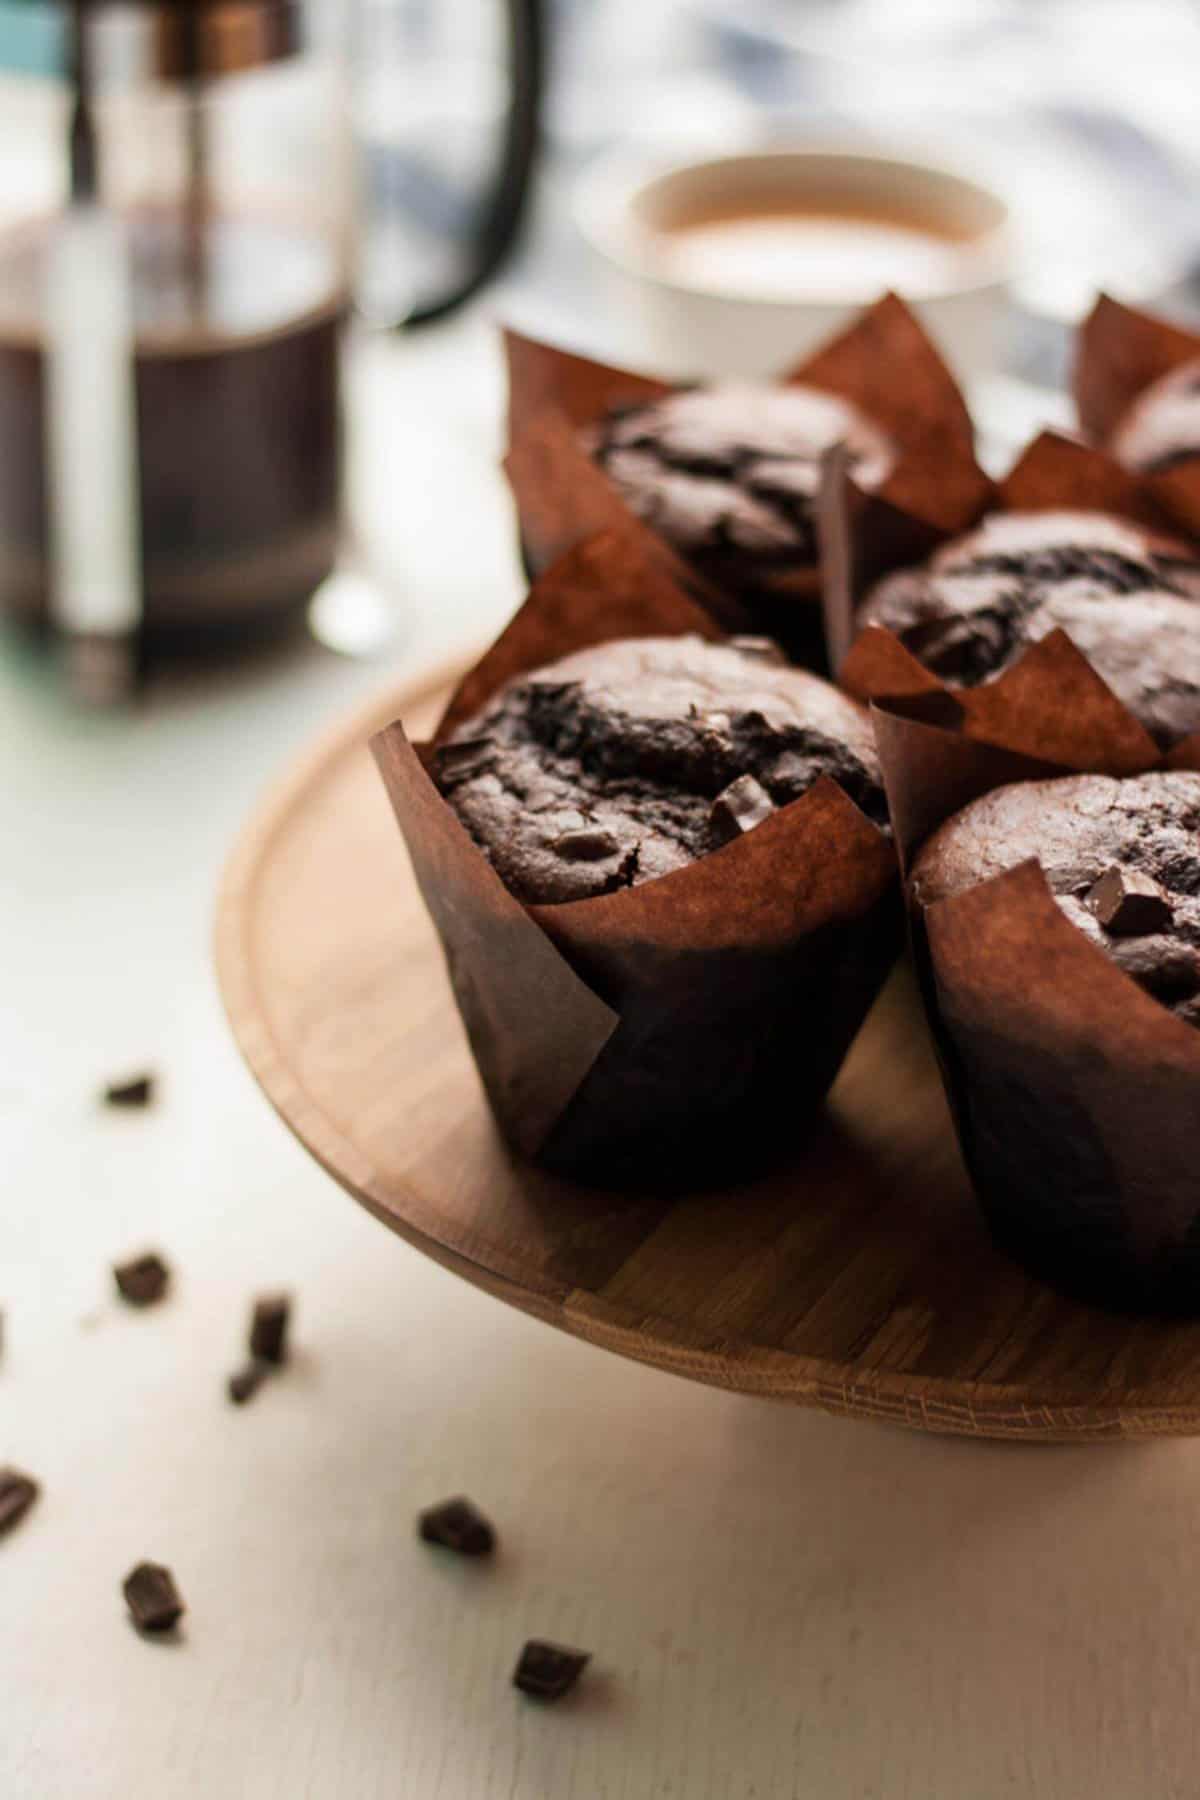 Double Chocolate Sweet Potato Muffins - these easy to make muffins are a chocolatey indulgence and are super moist thanks to the addition of mashed sweet potato! You have to try them! | eatloveeats.com